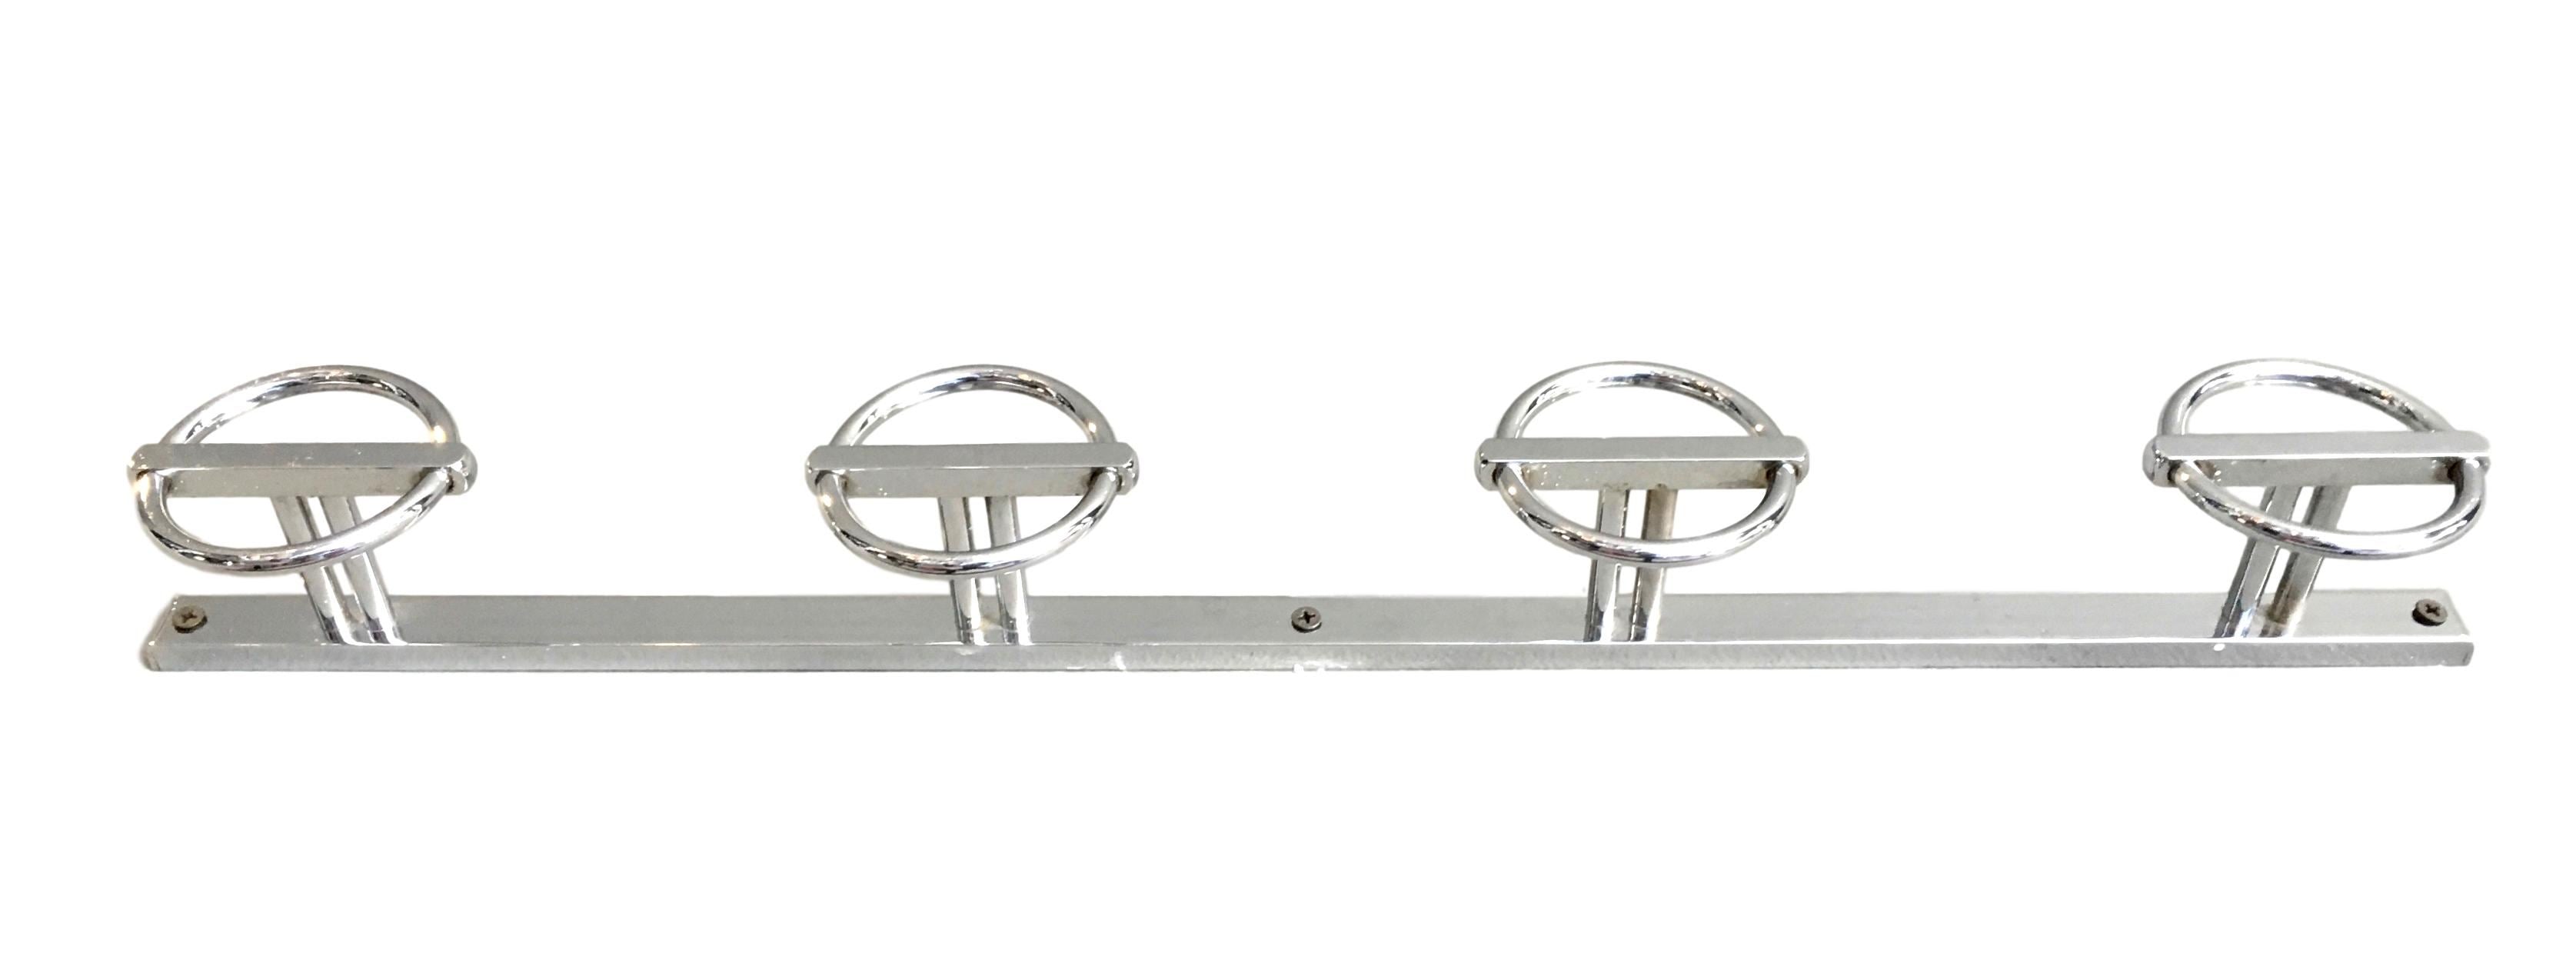 Large Nickel Coat Rack in the Style of Jean Royère, 1960s France